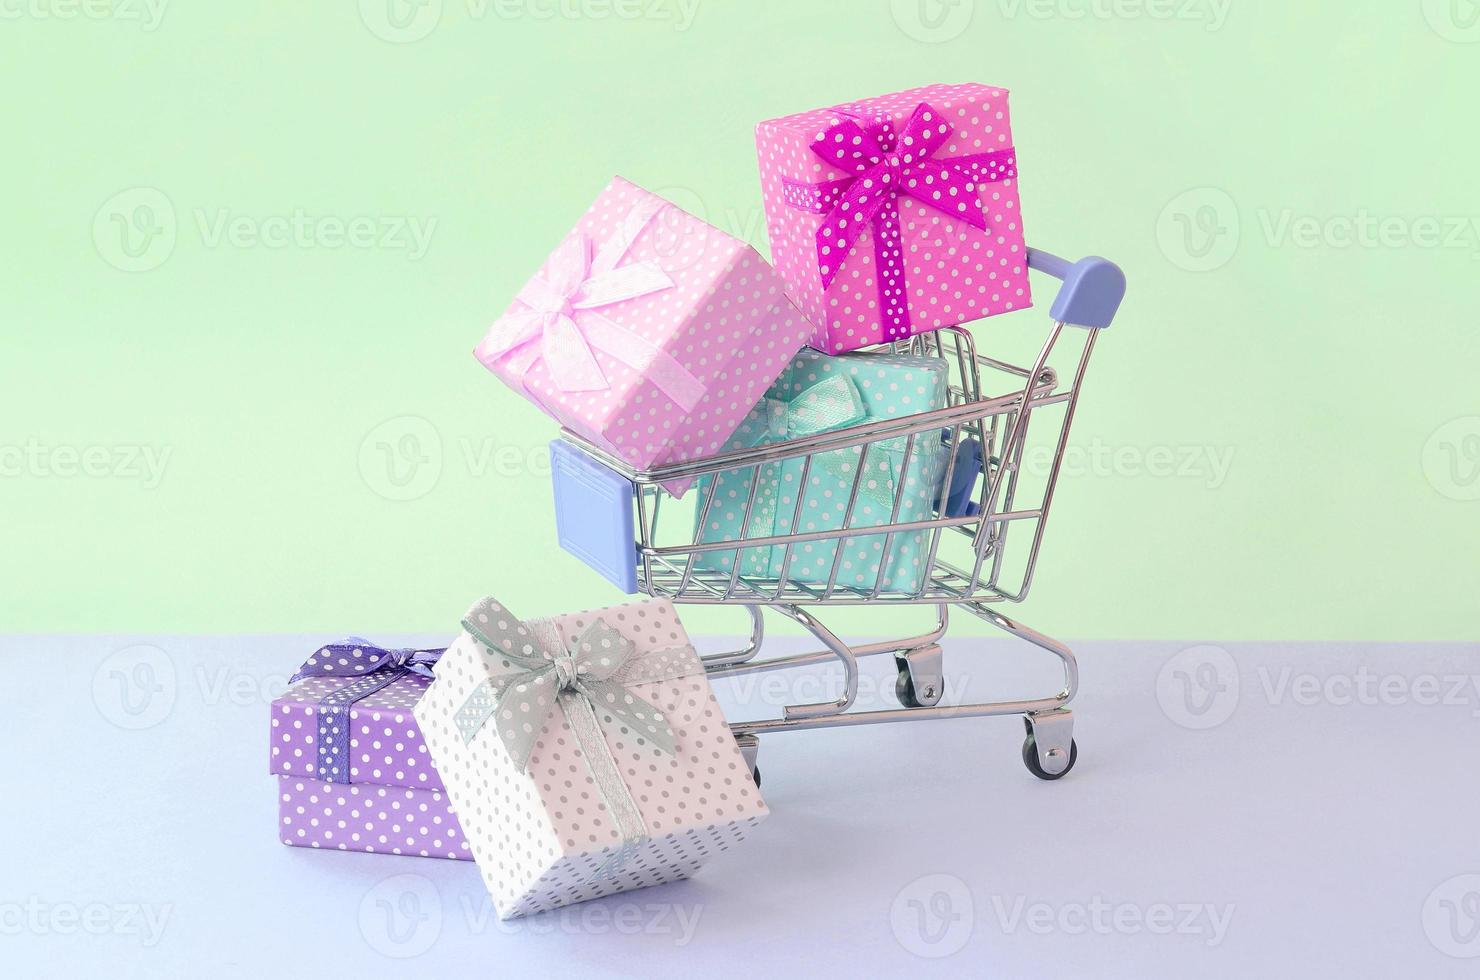 Small gift boxes of different colors with ribbons in shopping cart on a violet and blue pastel background photo